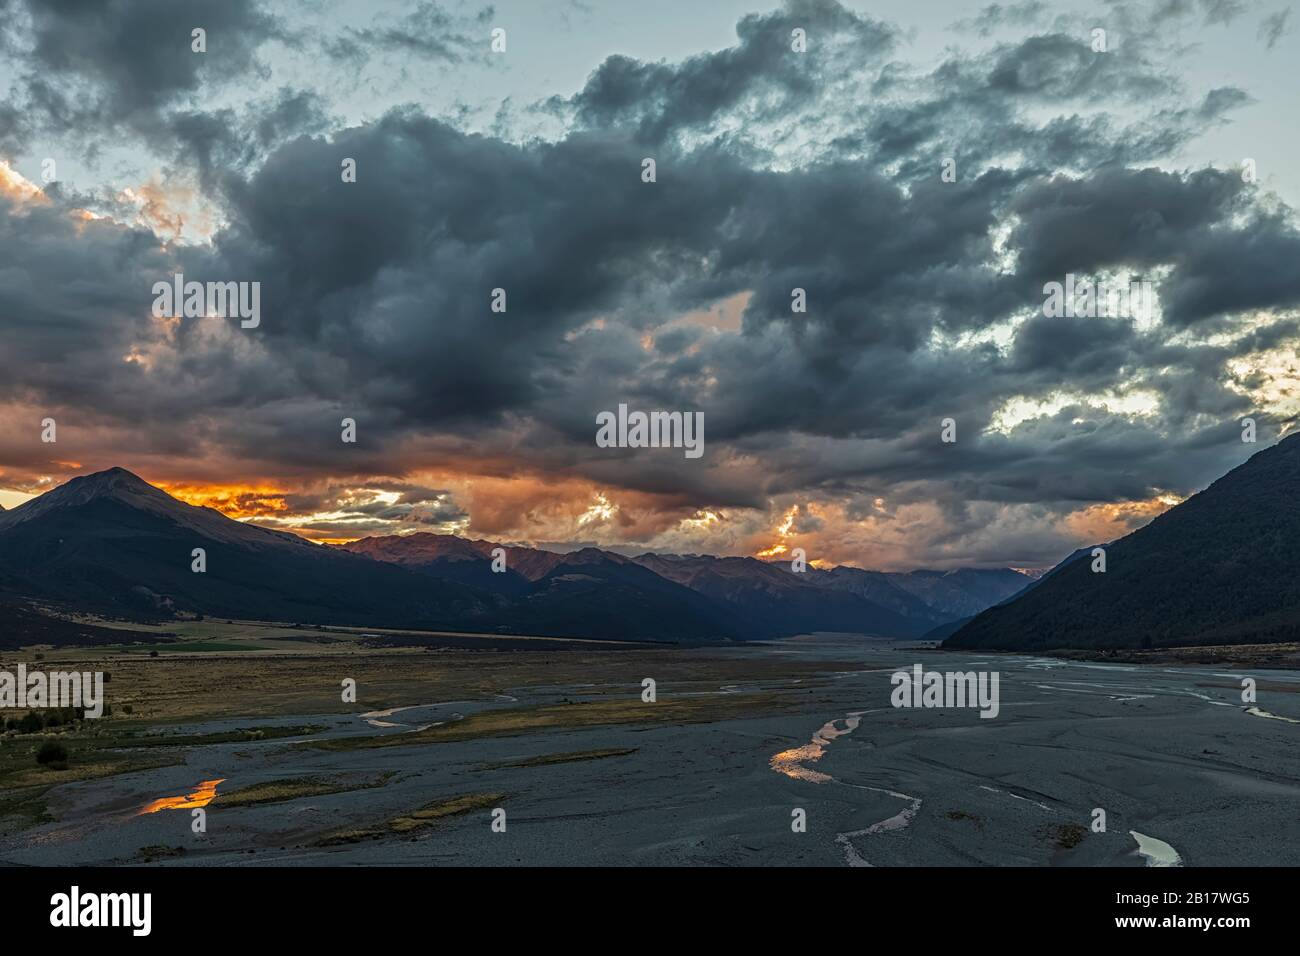 New Zealand, Grey District, Inchbonnie, Clouds over Waimakariri River in Arthurs Pass National Park at dusk Stock Photo